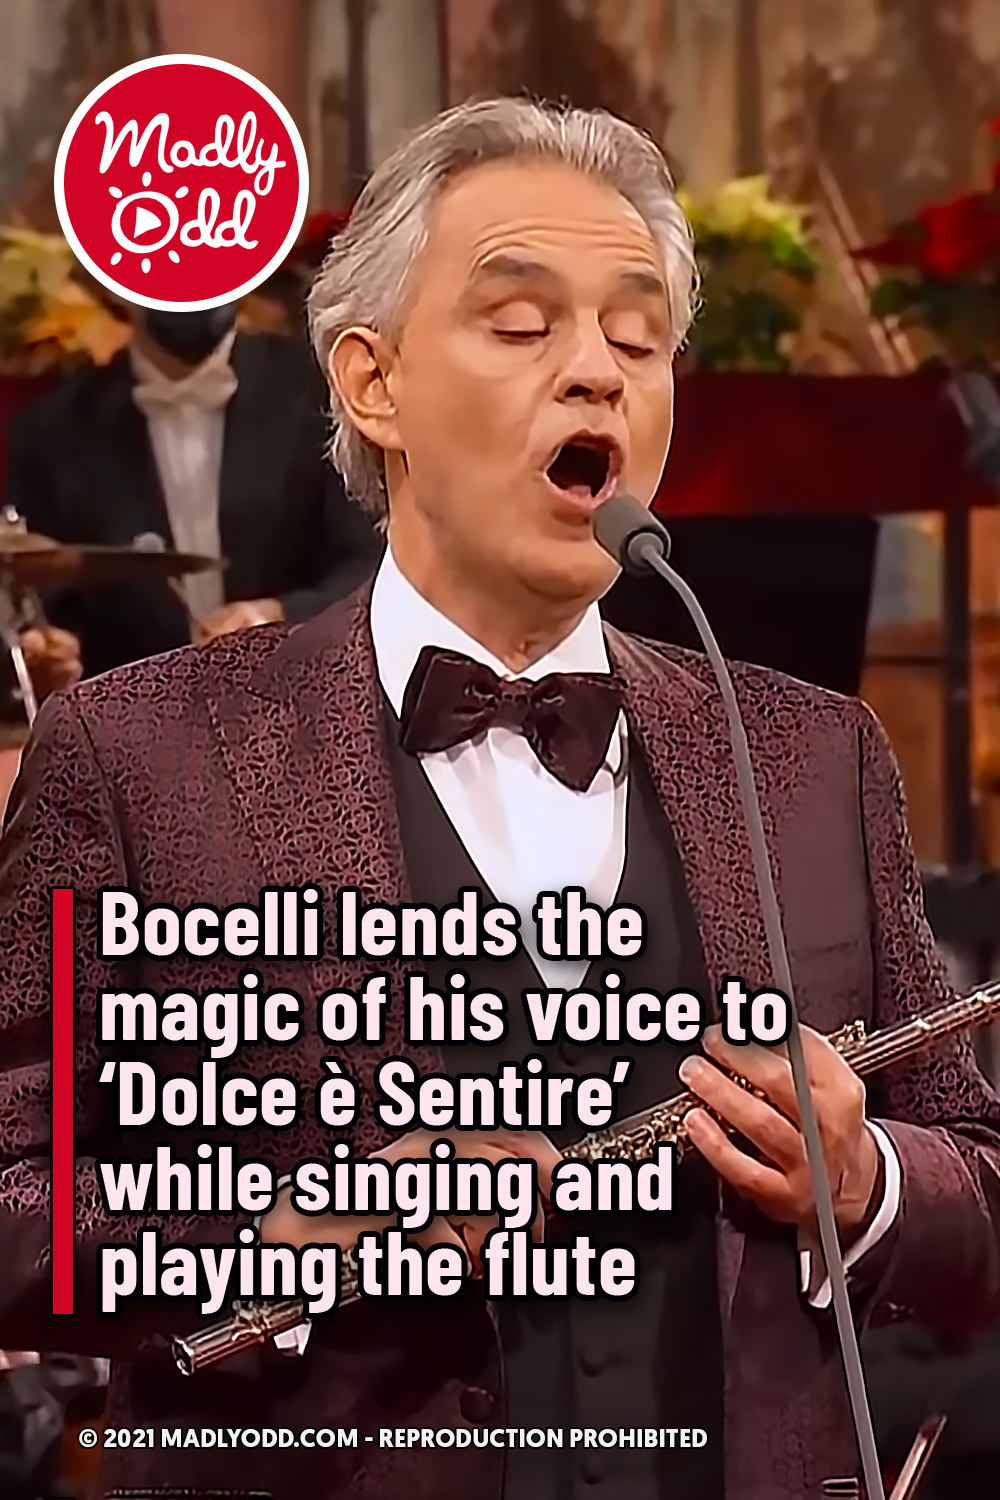 Bocelli lends the magic of his voice to ‘Dolce è Sentire’ while singing and playing the flute